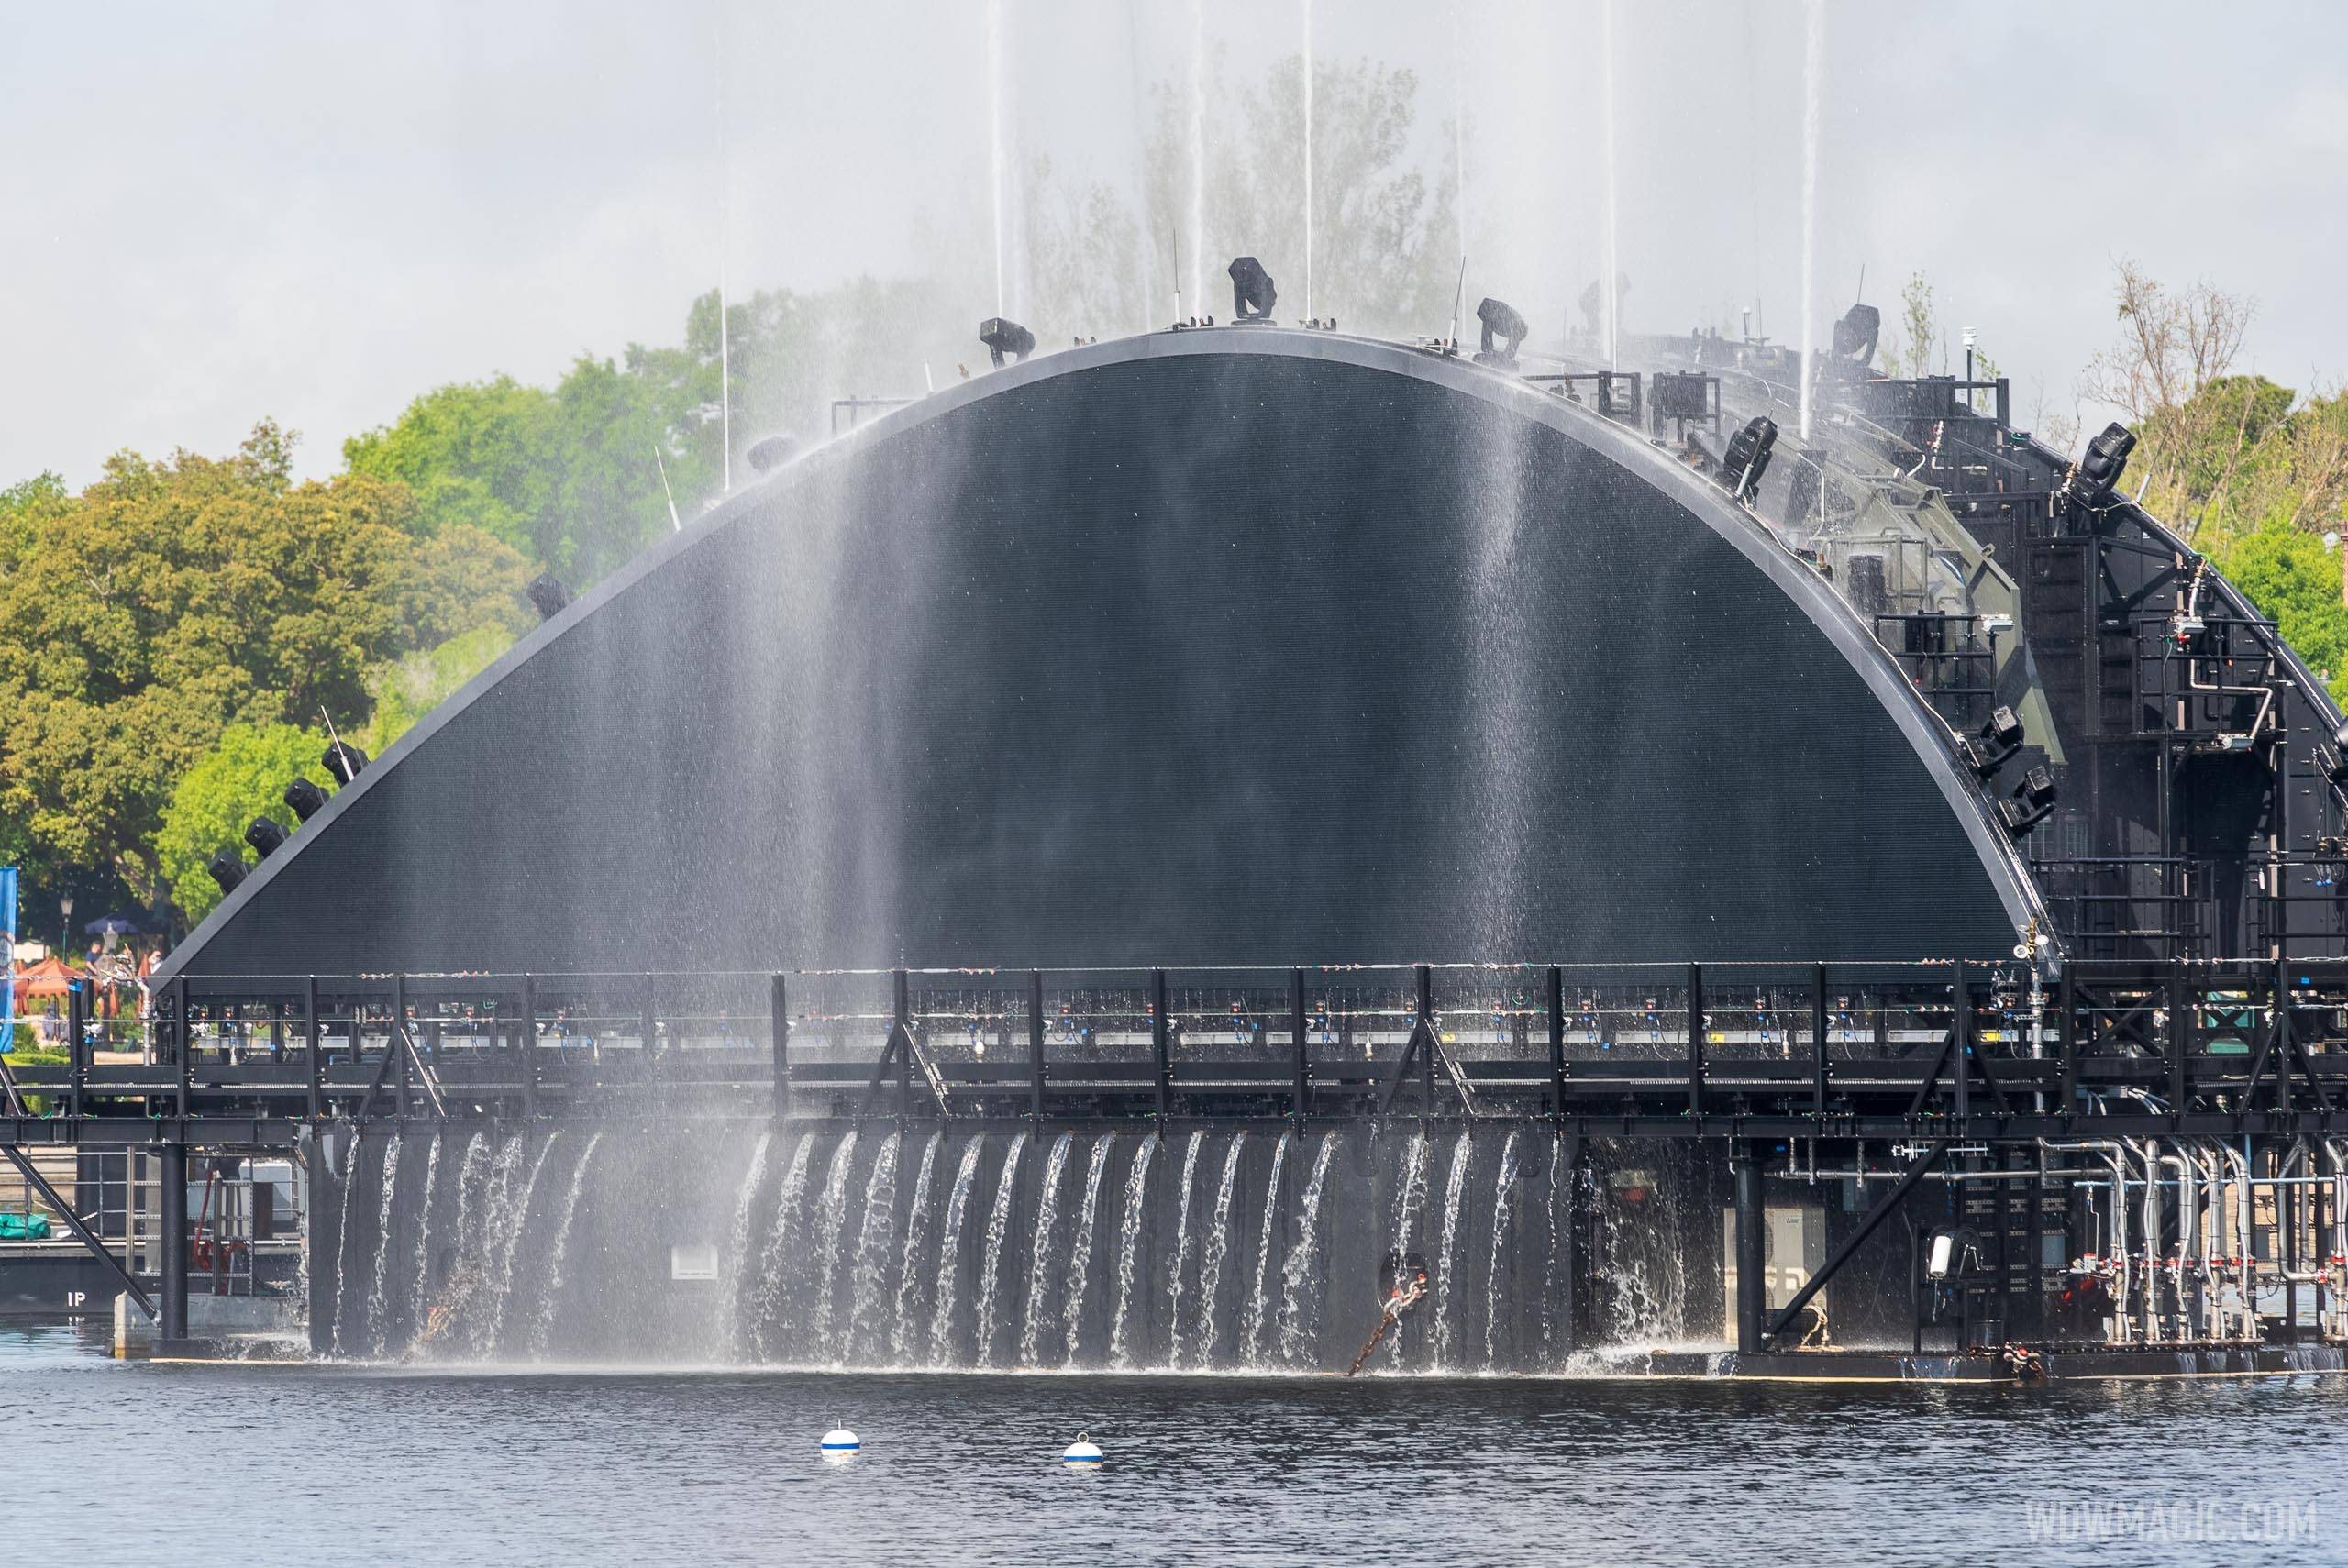 Harmonious Mexico barge fountain test and icon barge lighting test - March 24 2021